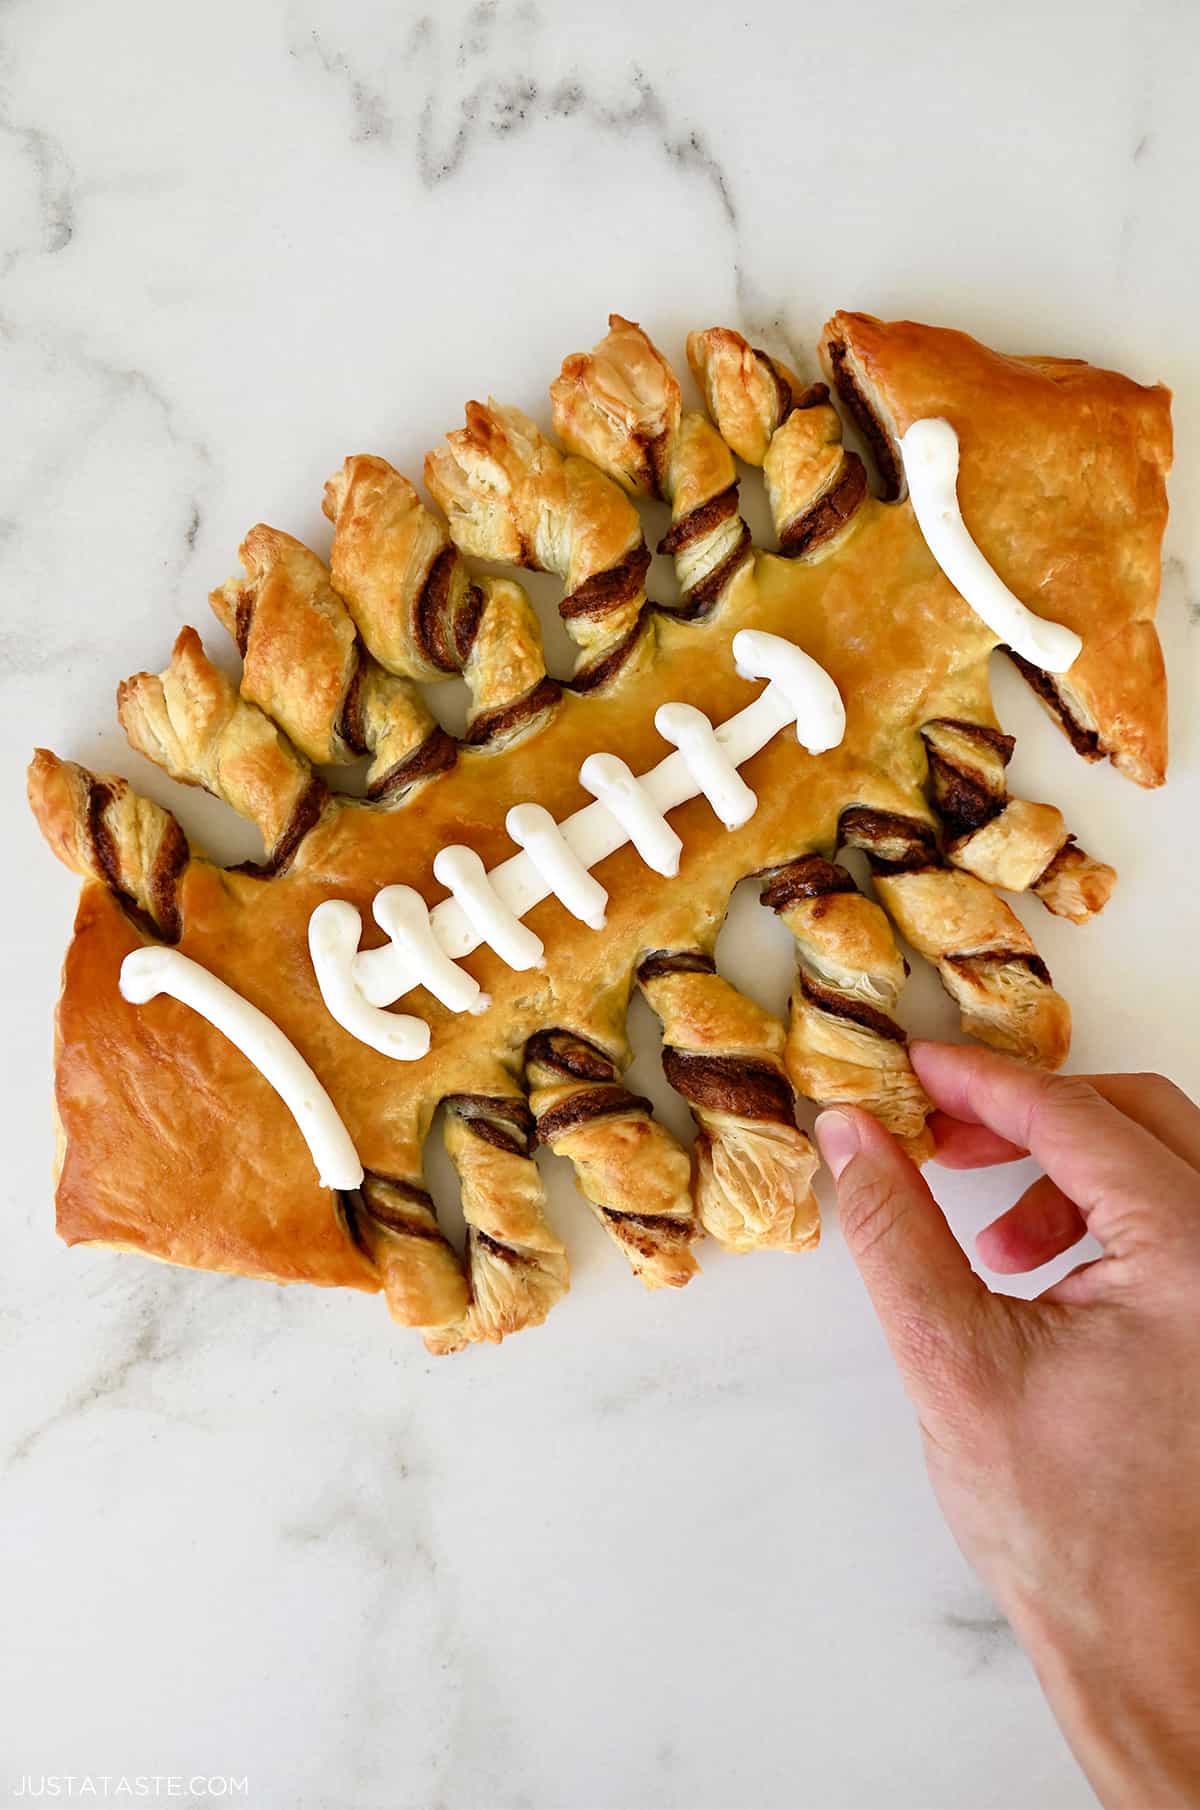 Puff pastry twisted and baked in the shape of a football with vanilla frosting laces.